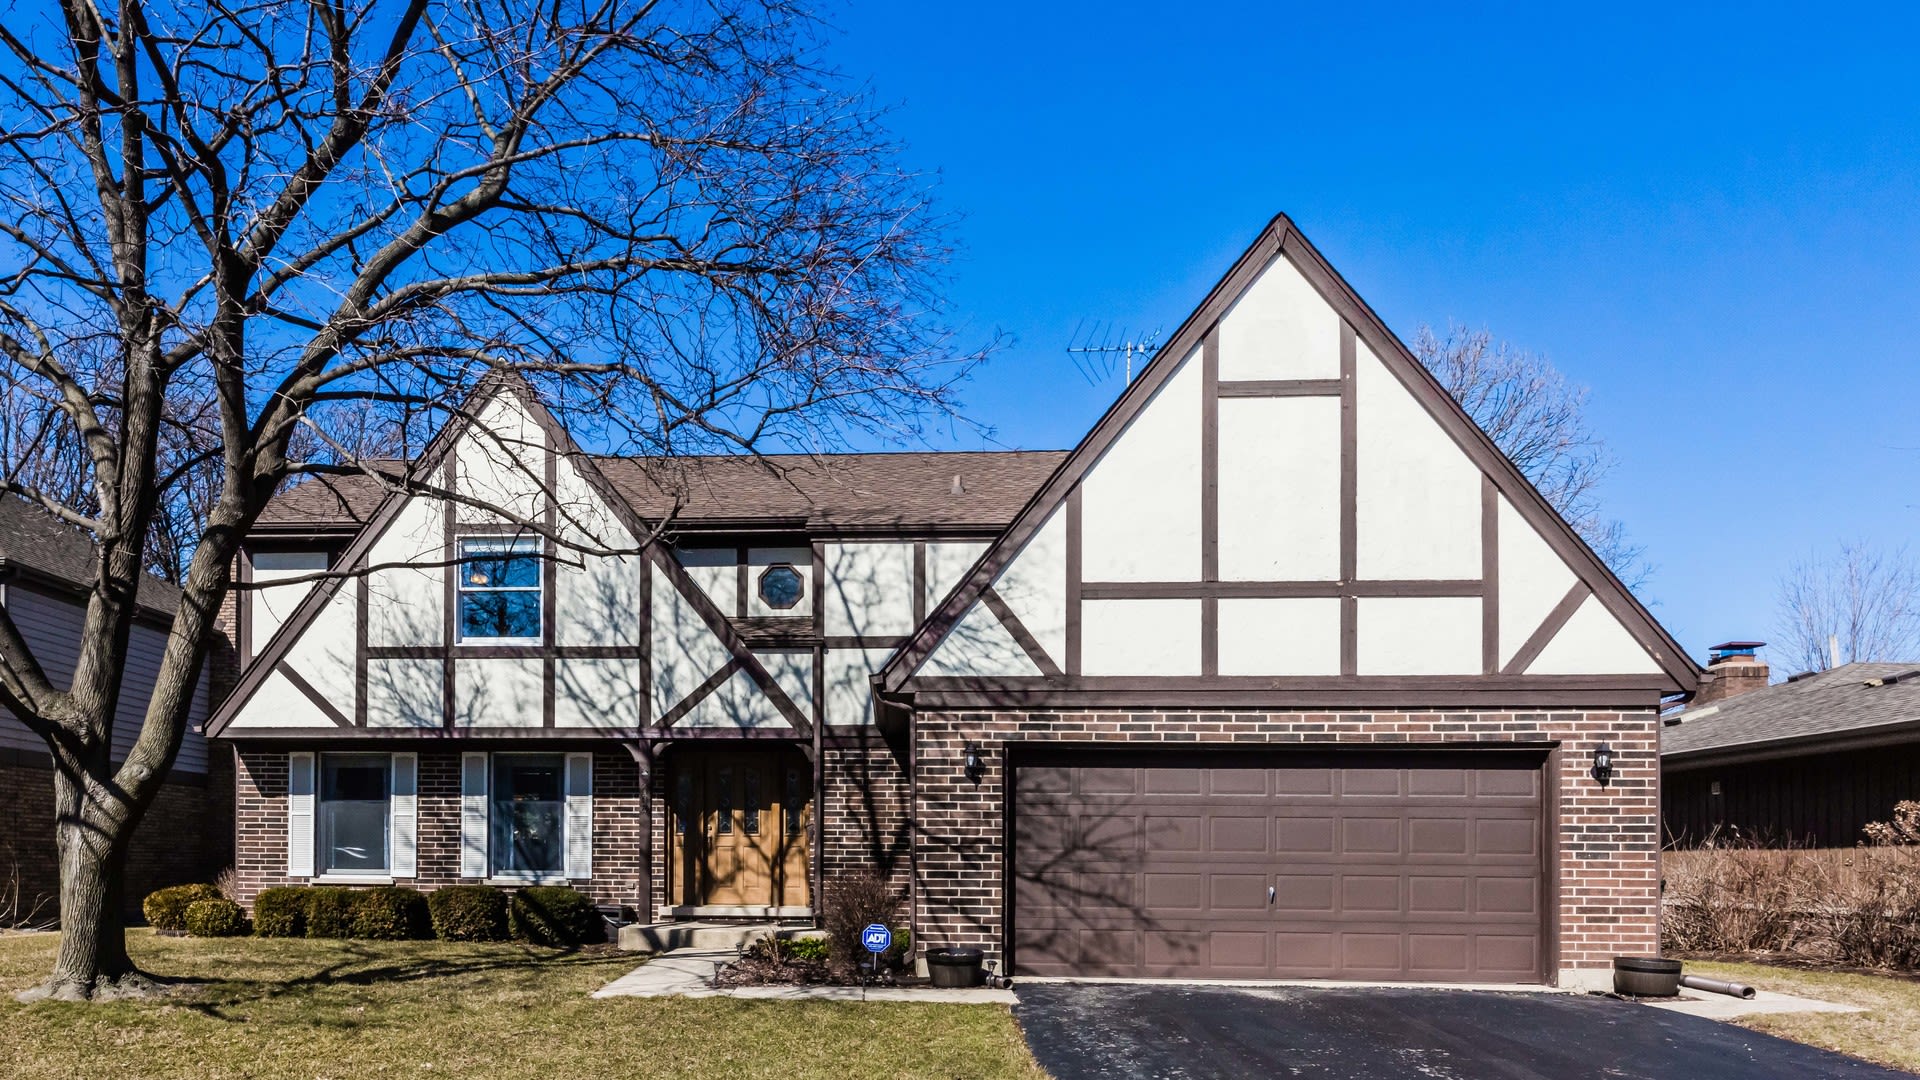 Open House Sunday March 11, 2018 from 1-3pm 3008 Edgemont Ln., Park Ridge, IL 60068